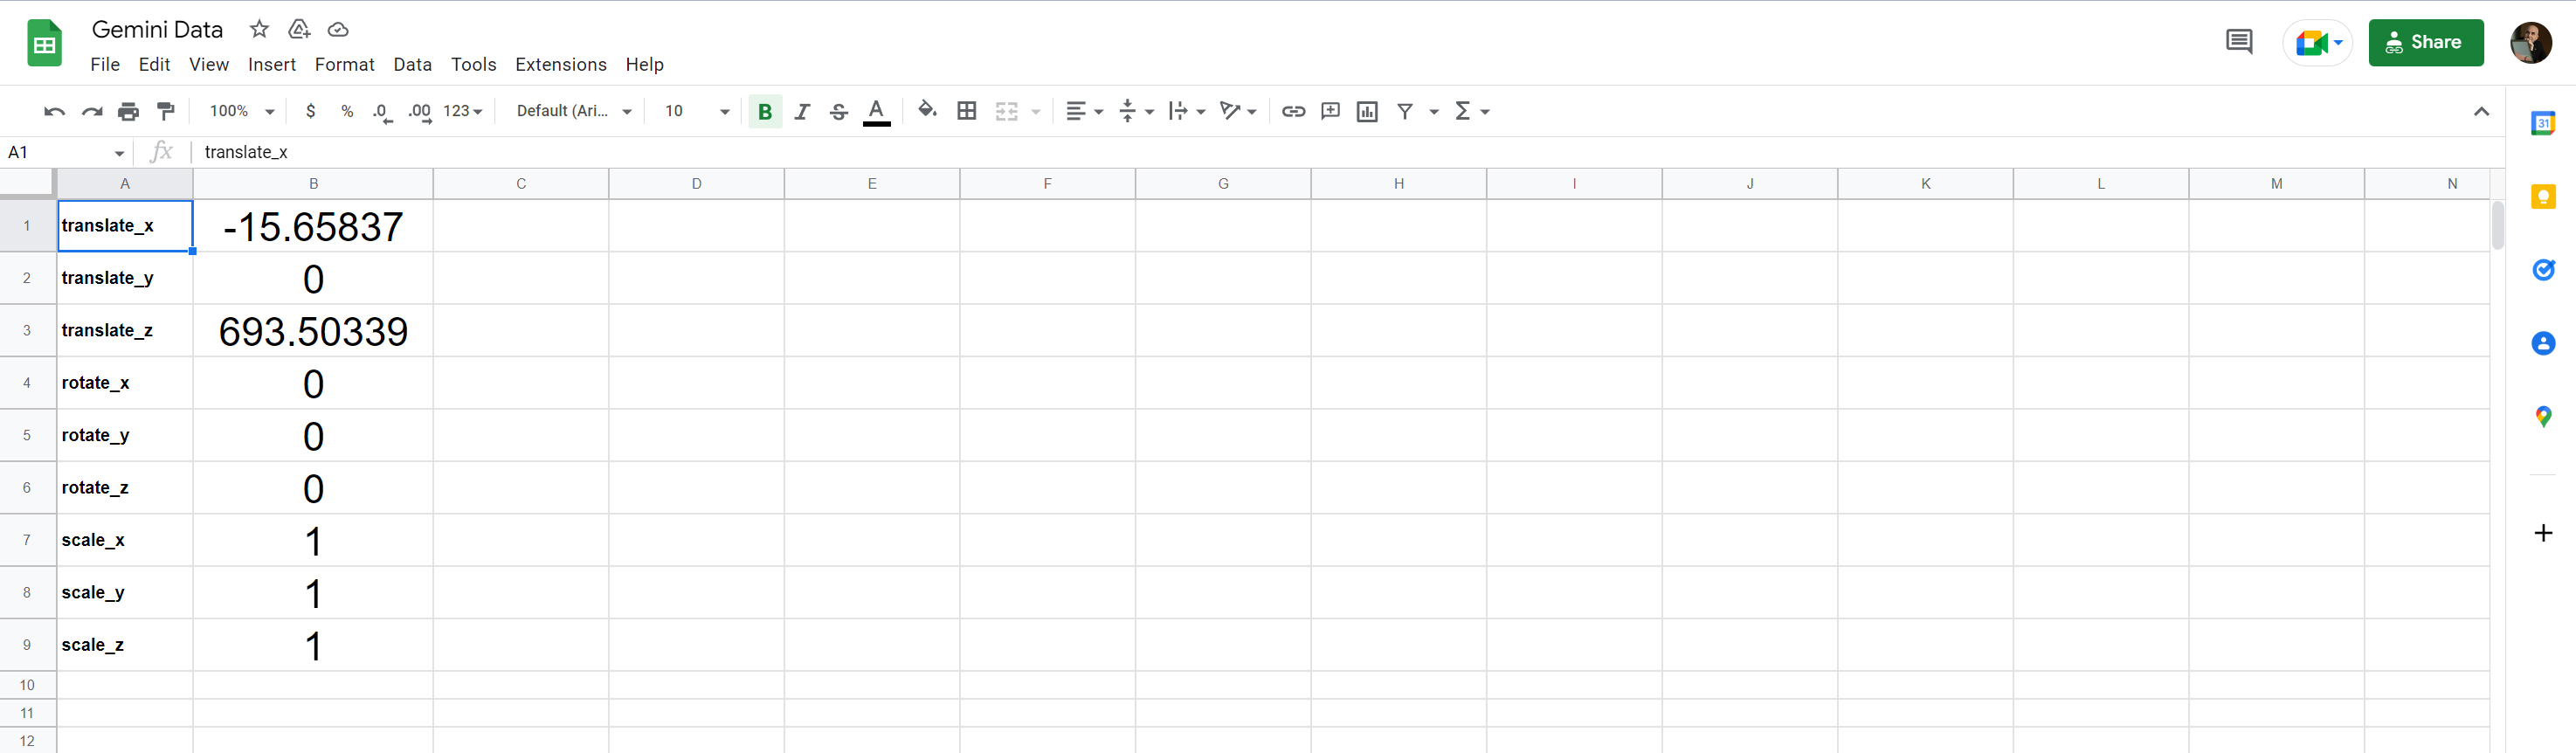 Google Sheet with object location, scale, and rotation information